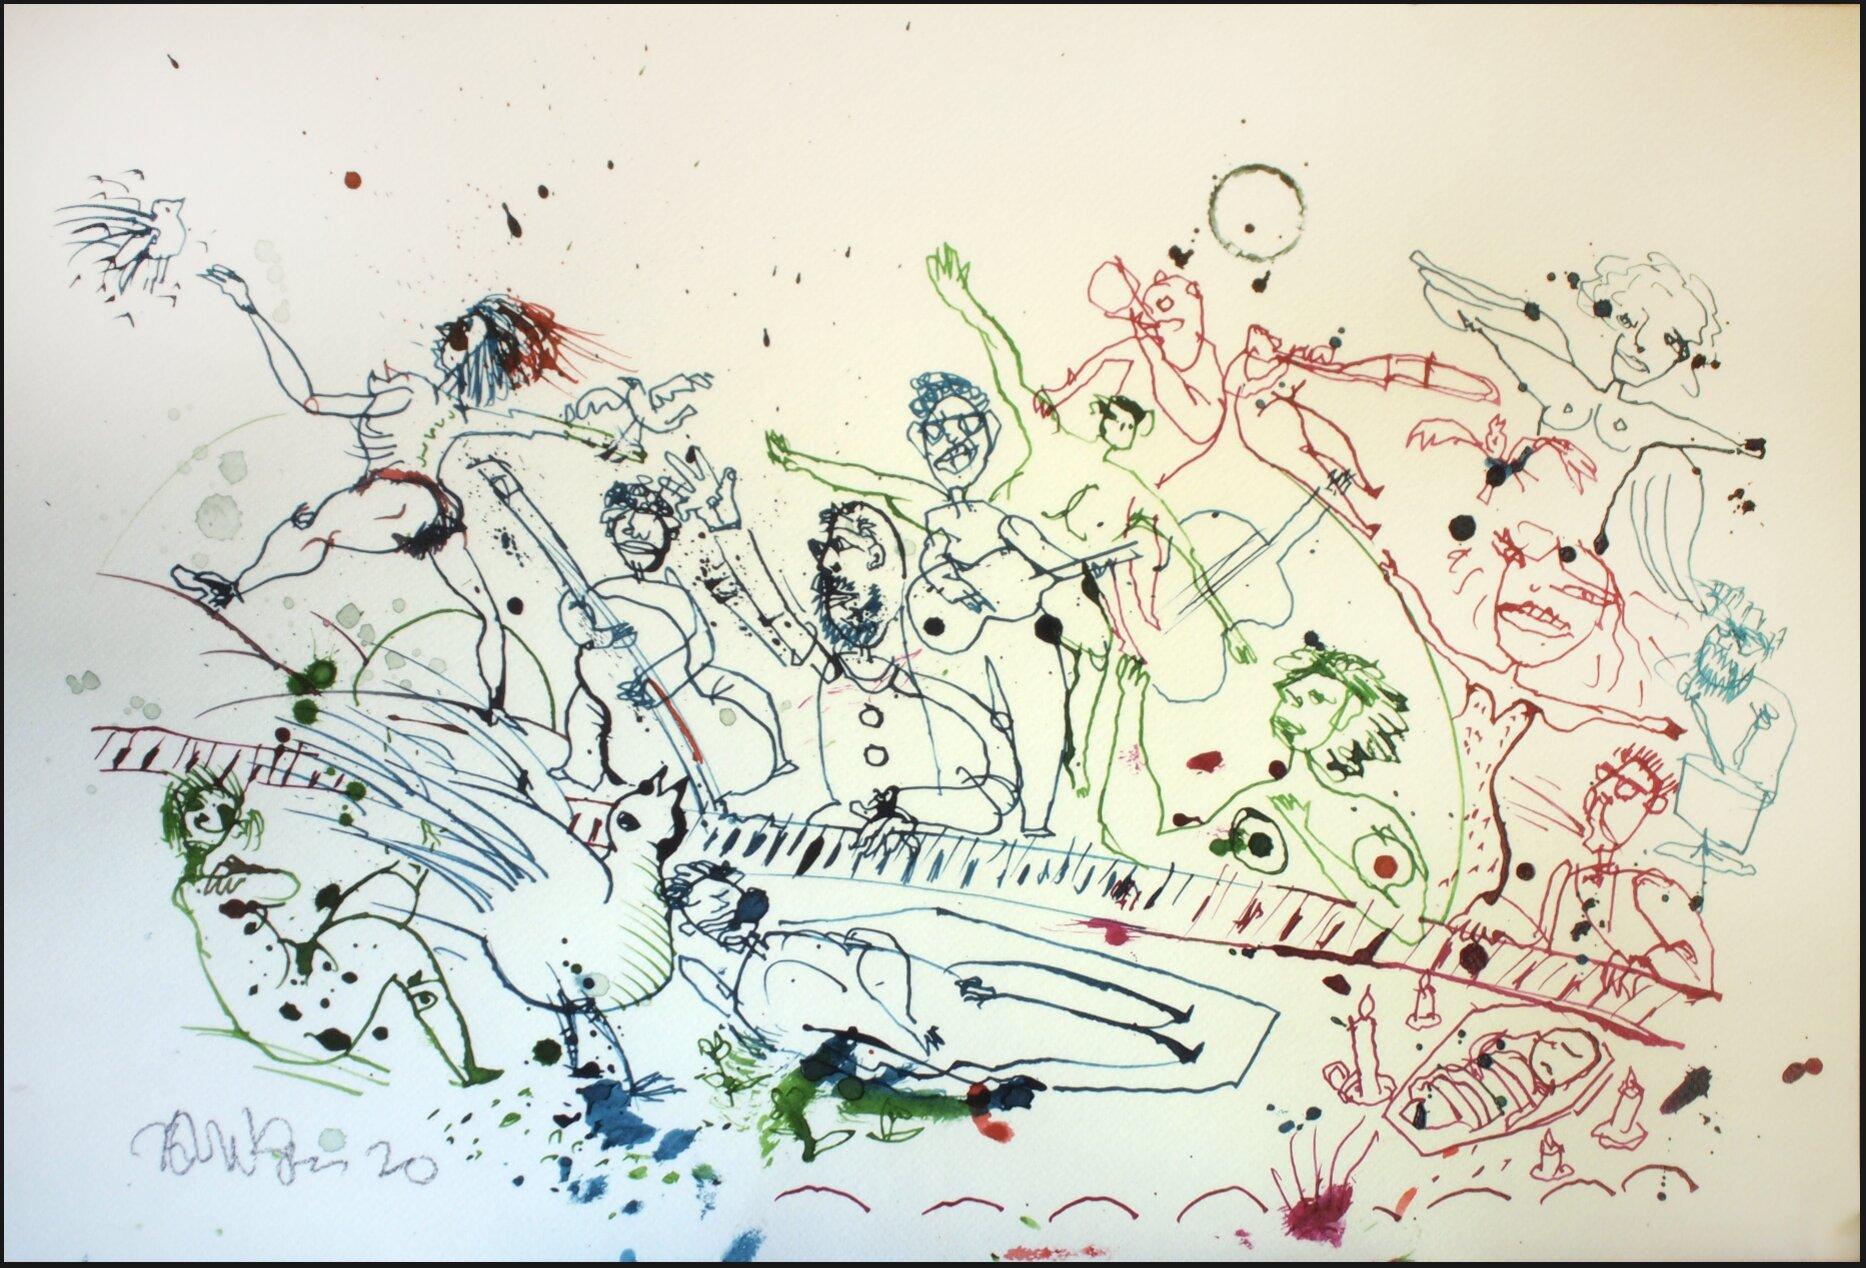 The band plays on, Drawing, Pen & Ink on Watercolor Paper - Art by Edward Zelinsky